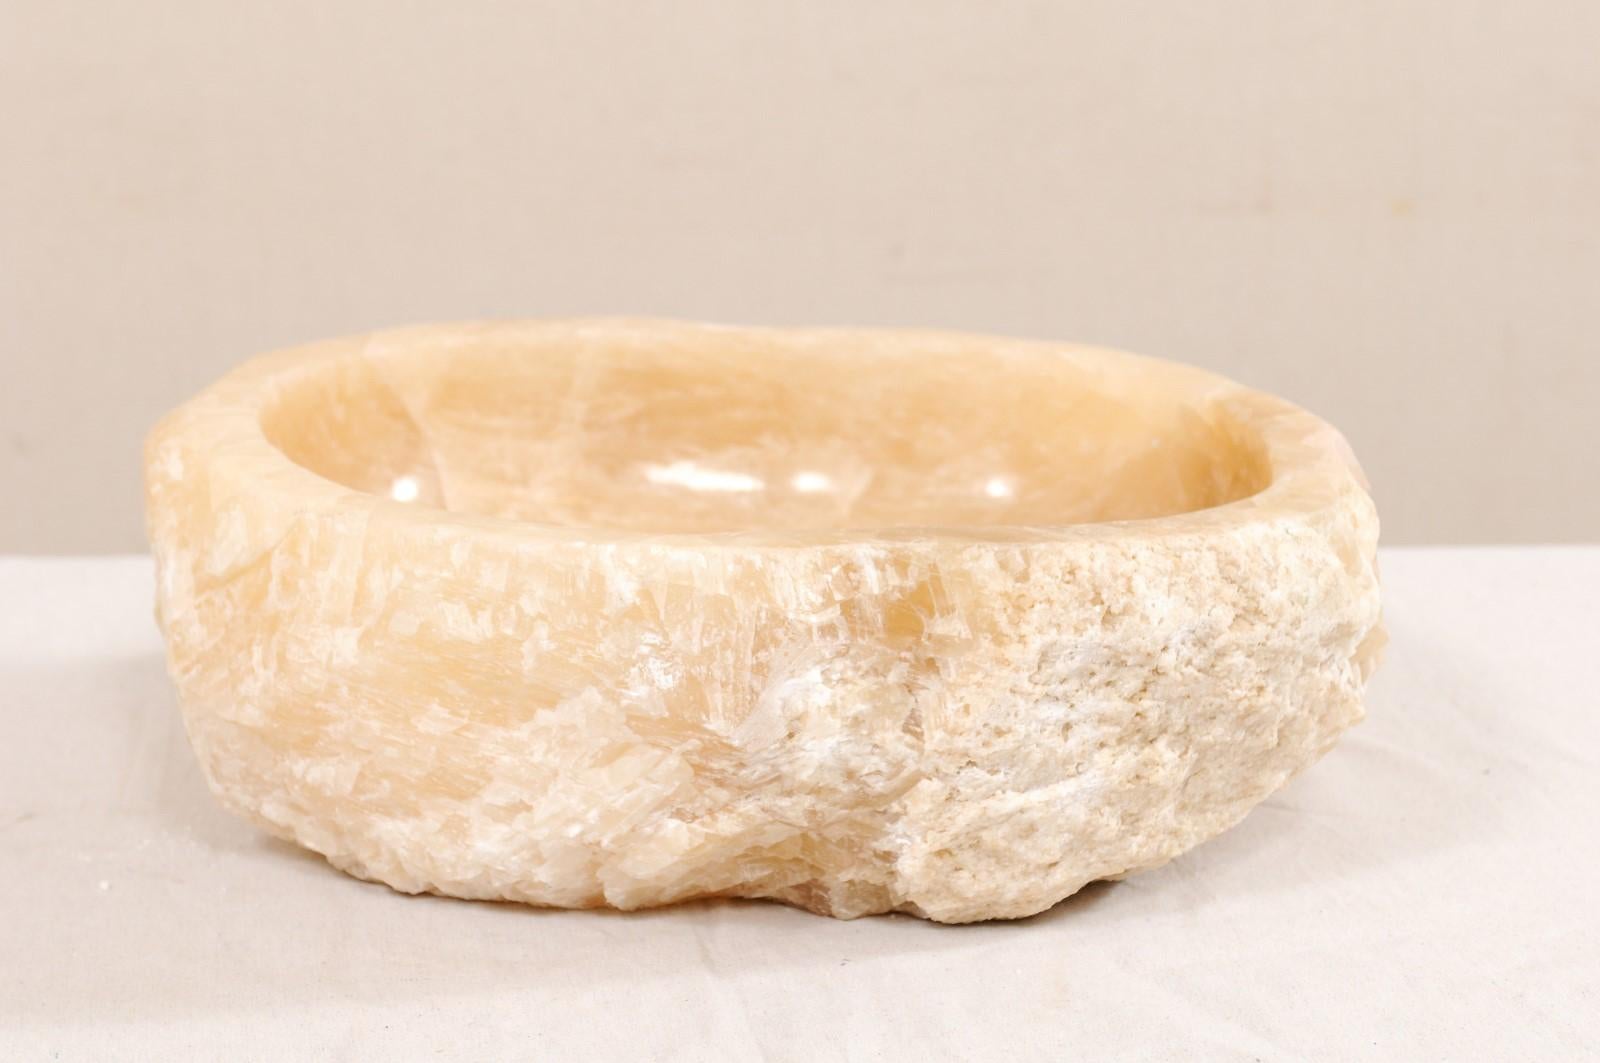 Carved Onyx Rock Sink Basin in Cream Color 7